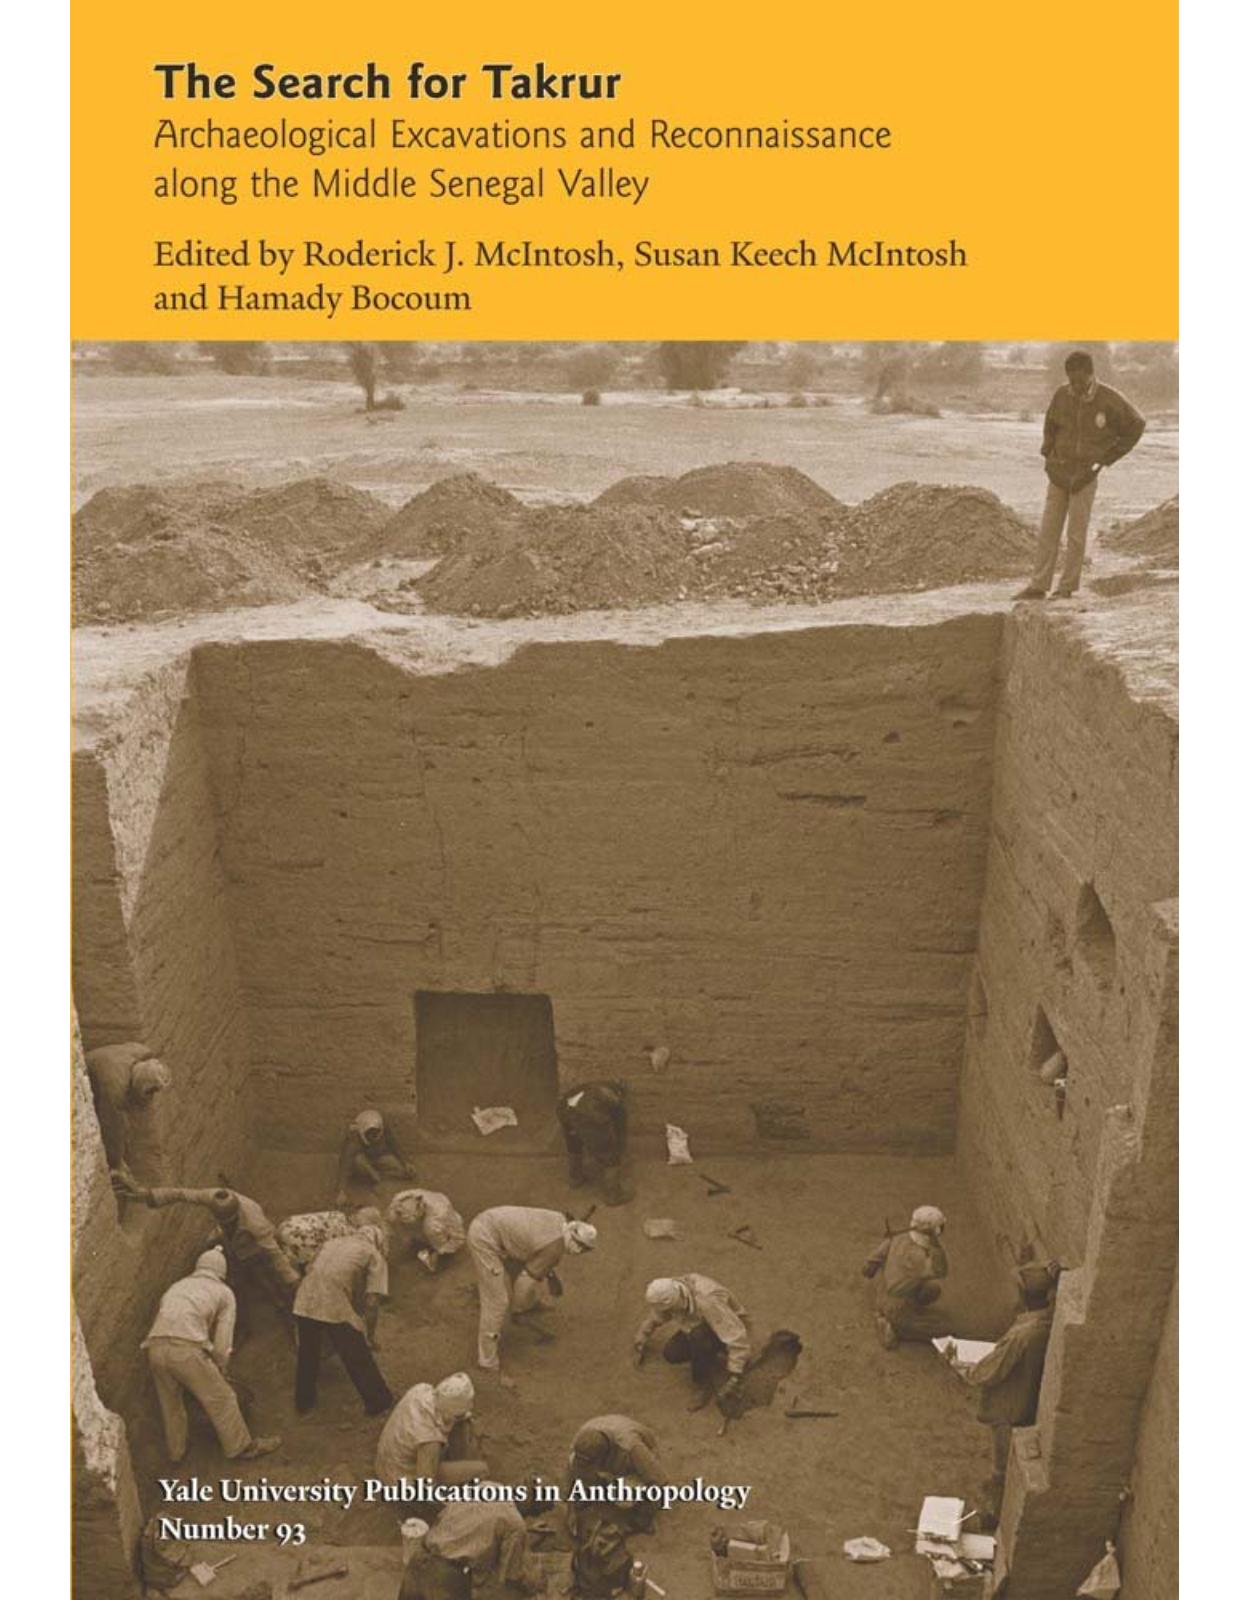 Search for Takrur. Archaeological Excavations and Reconnaissance along Middle Senegal Valley